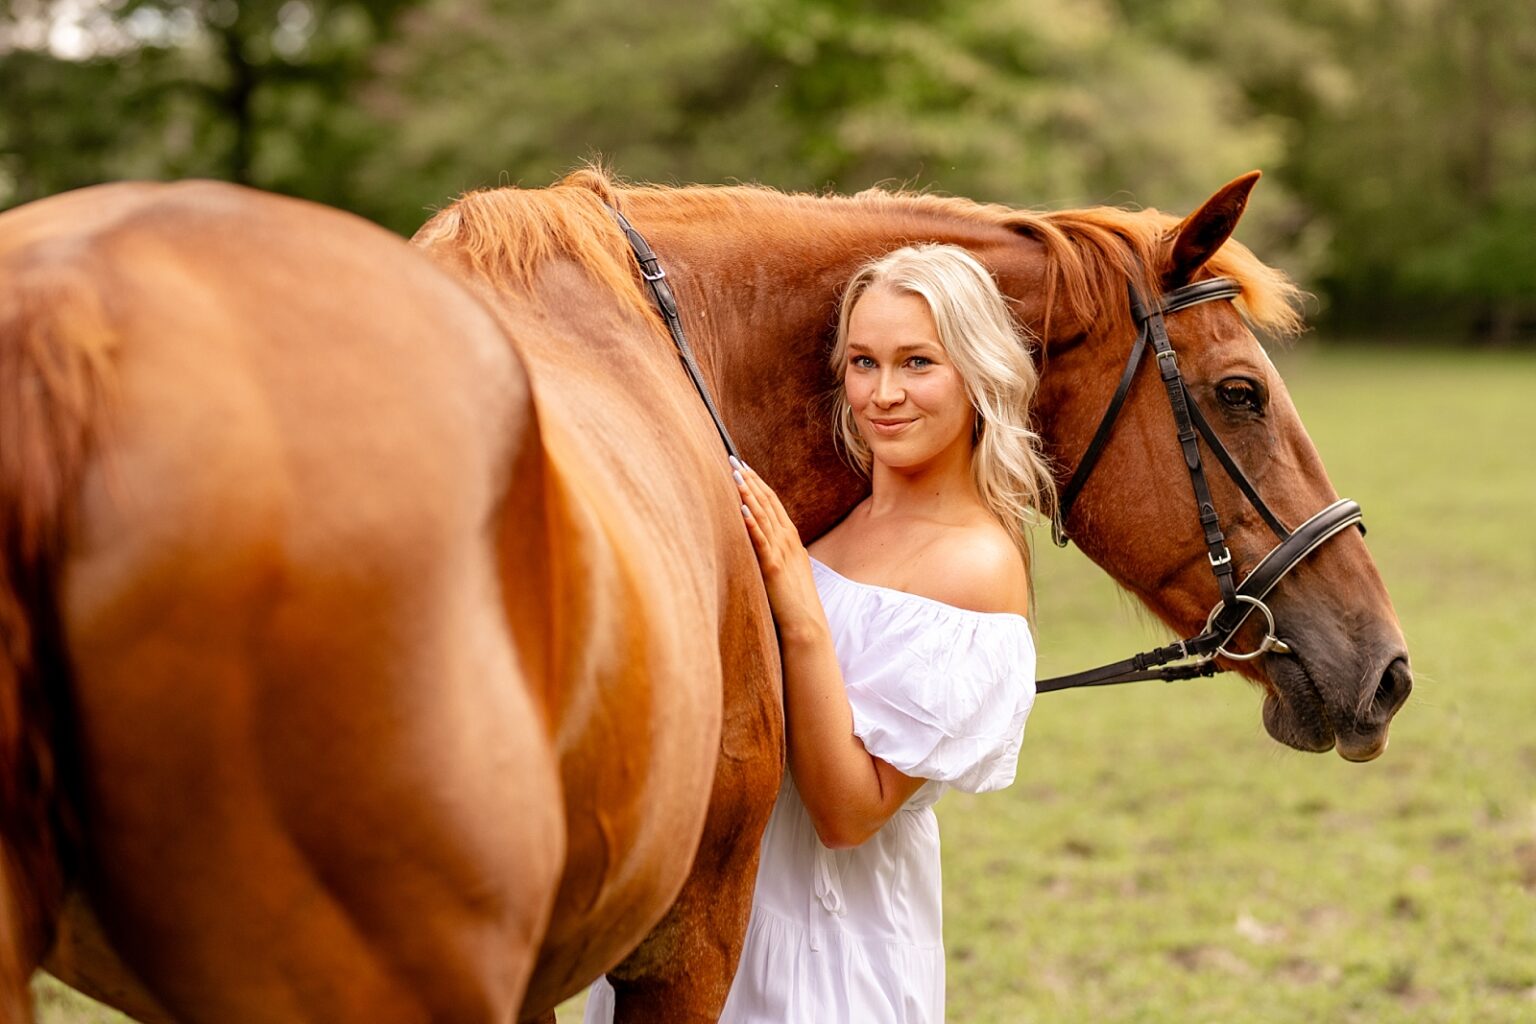 Horse photographer near Birmingham Alabama takes photos of chestnut mare and girl in white dress.